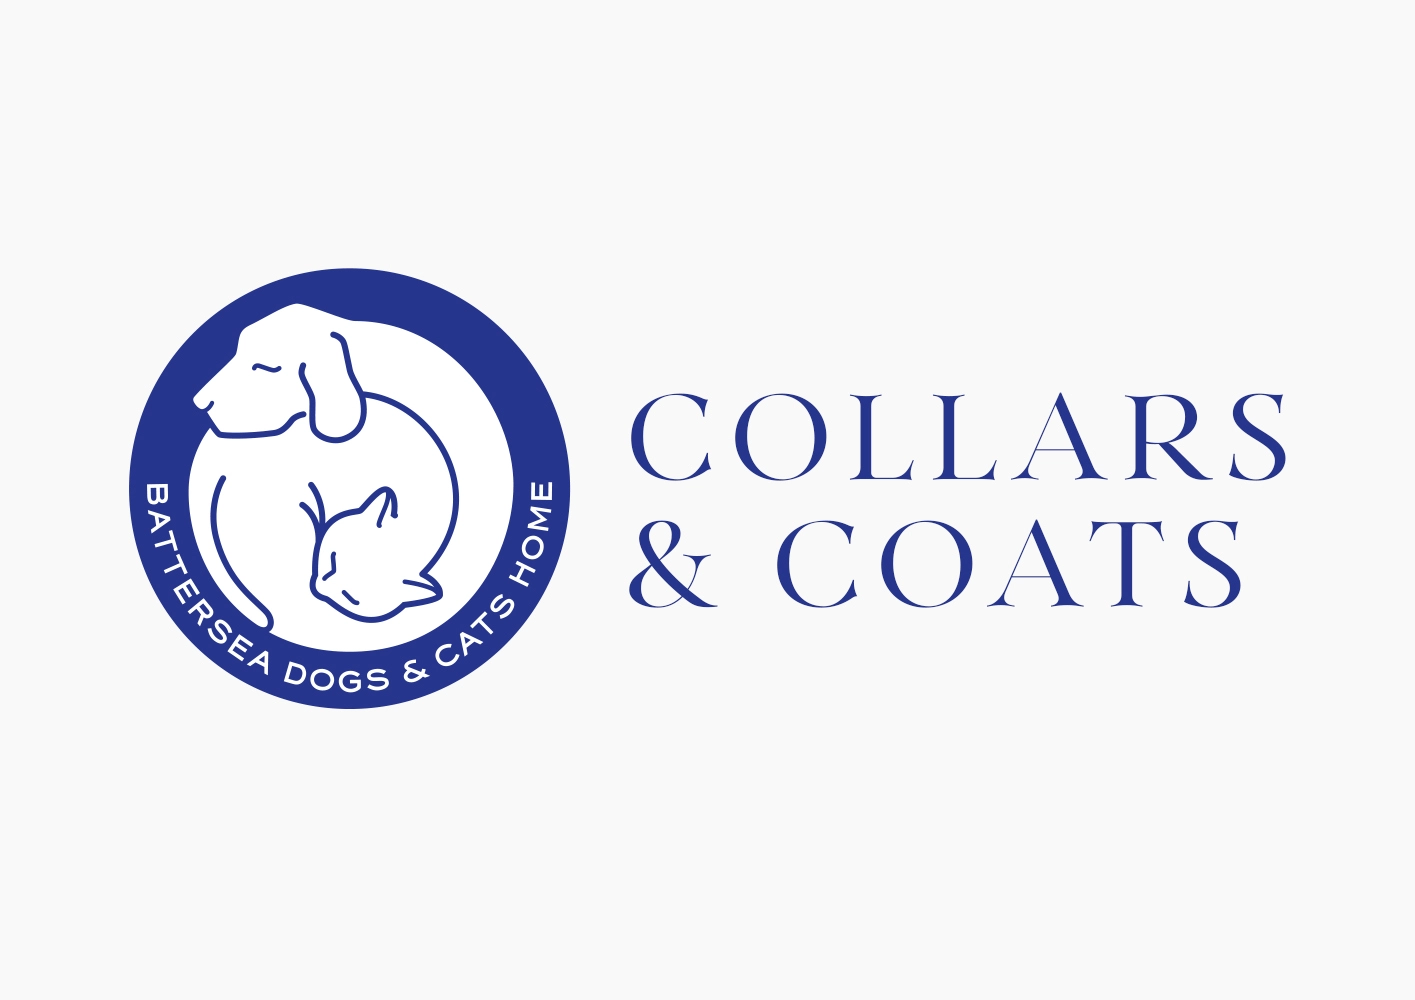 Supporting Battersea Collars & Coats Gala Event